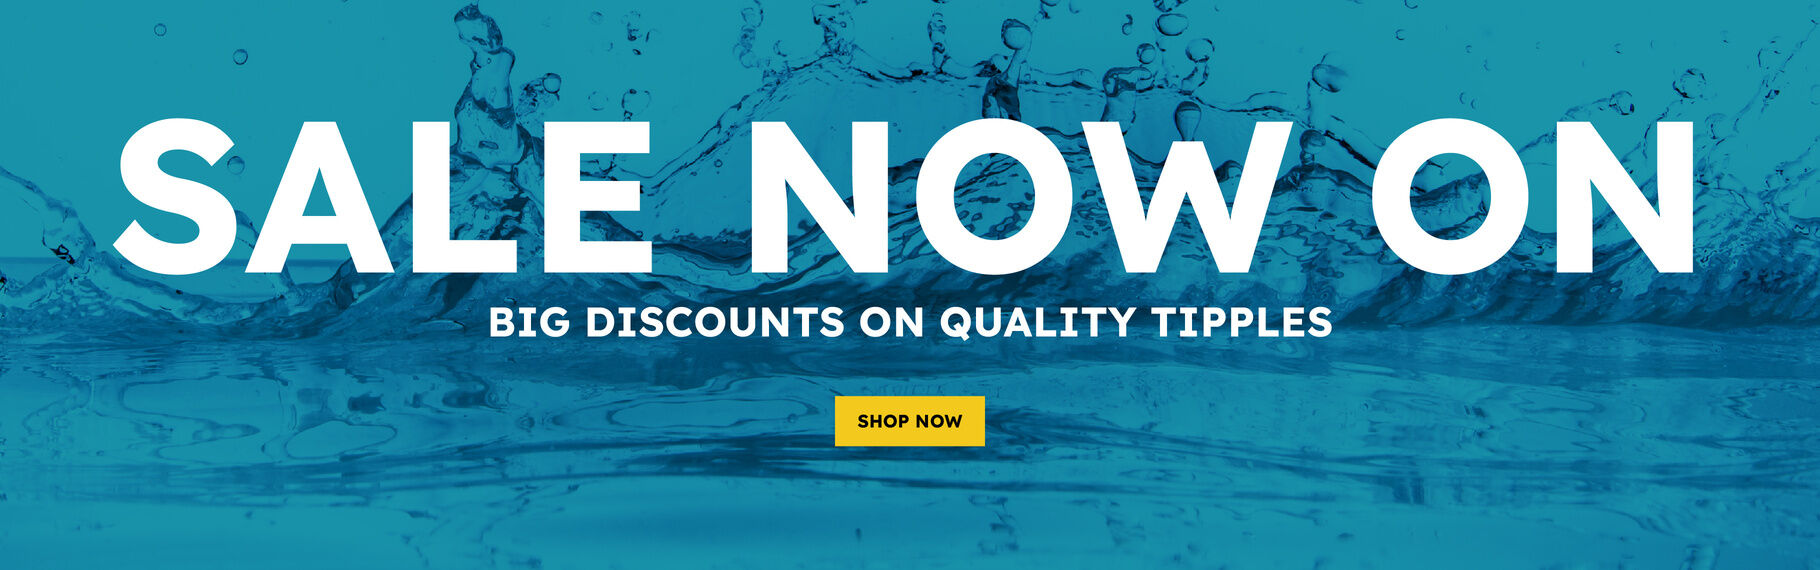 Sale Now On - Big Discounts On Quality Tipples